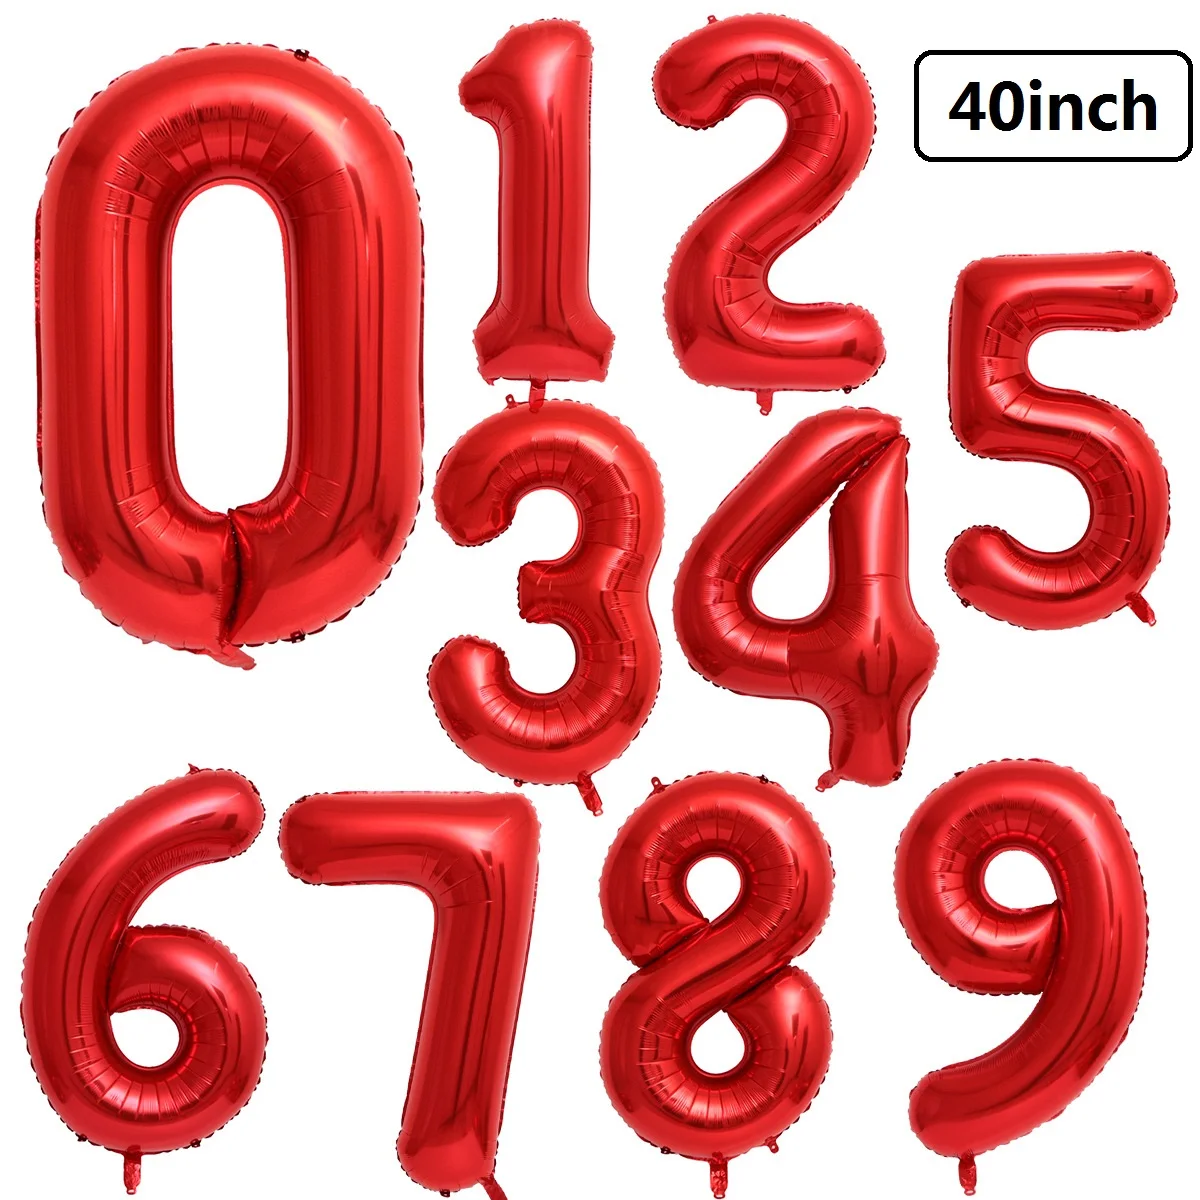 

Big Gold Sliver Foil Helium Number Balloons Happy Birthday Party Decorations Kids Toy Figures Wedding Valentines Day Air Globos